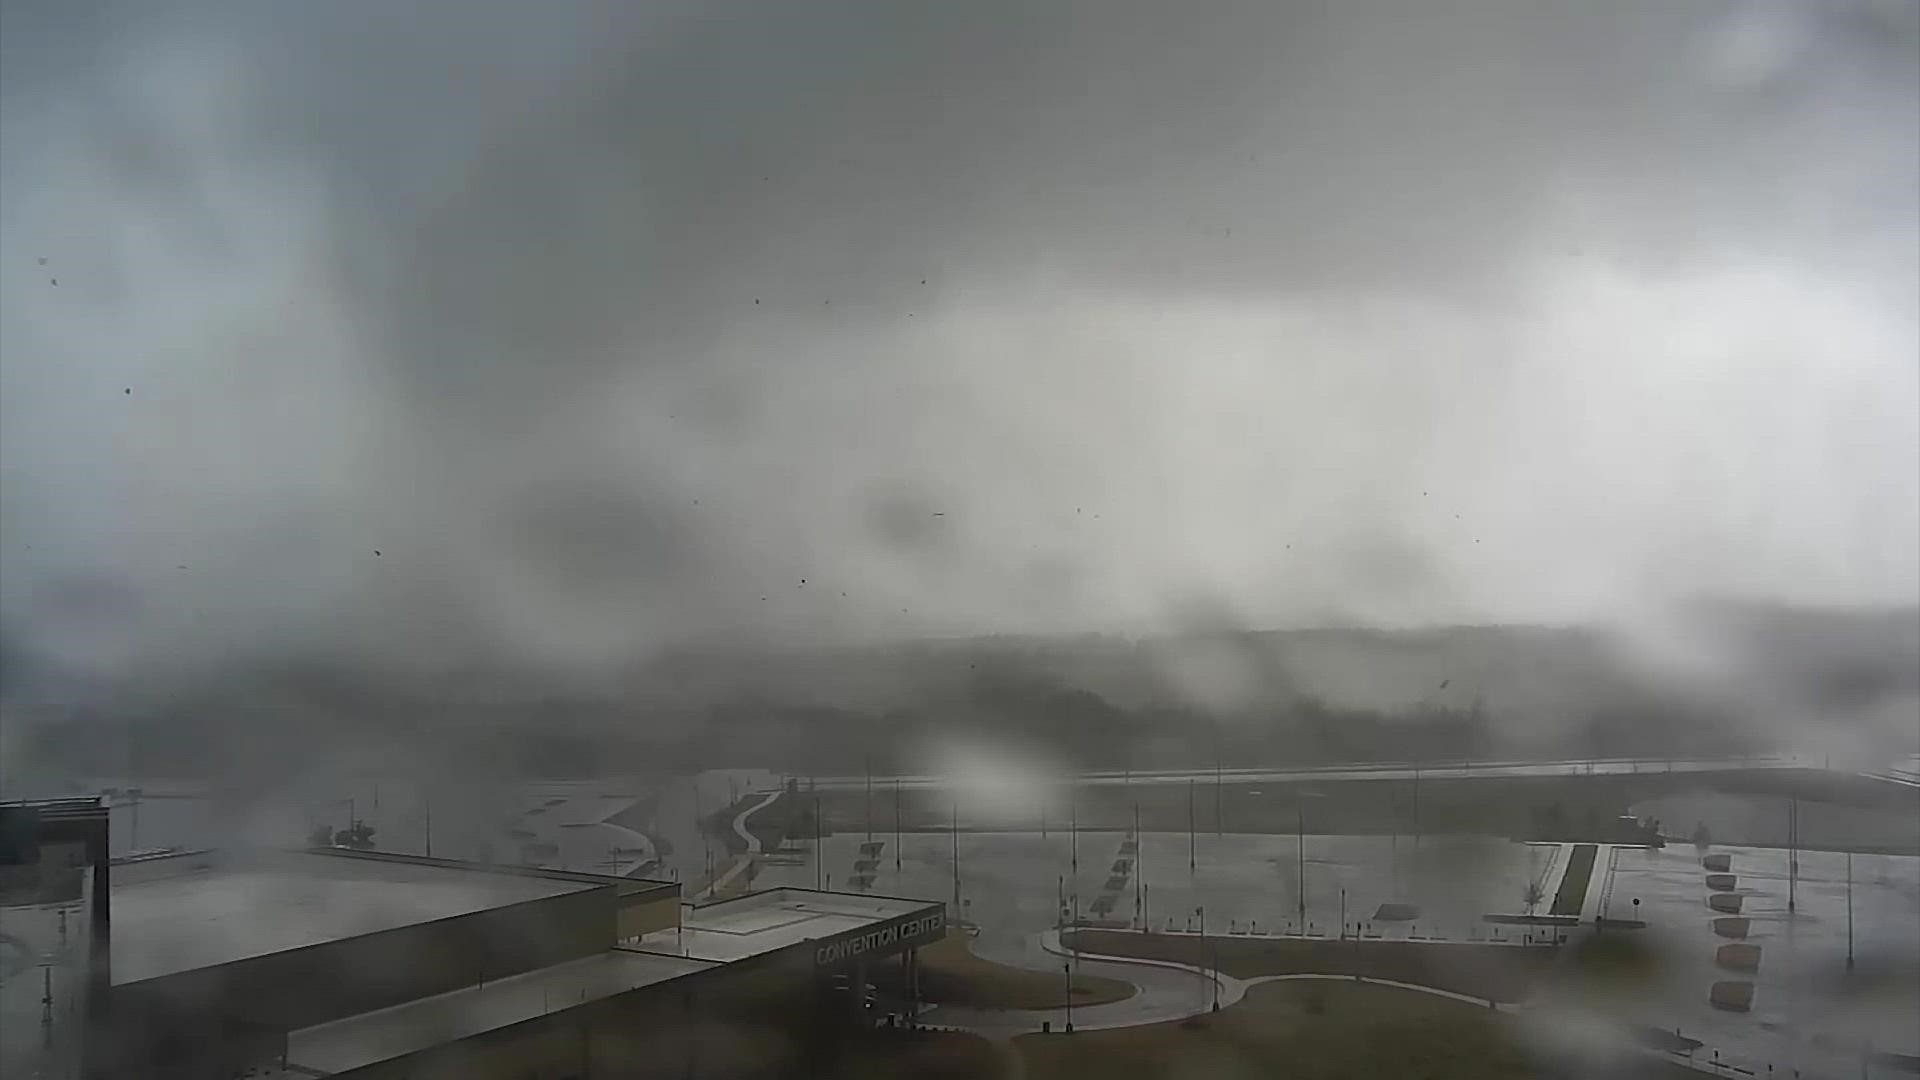 WFAA's sister station KVUE caught a large tornado on a tower camera as it passed by the Kalahari Resort in Round Rock, Texas